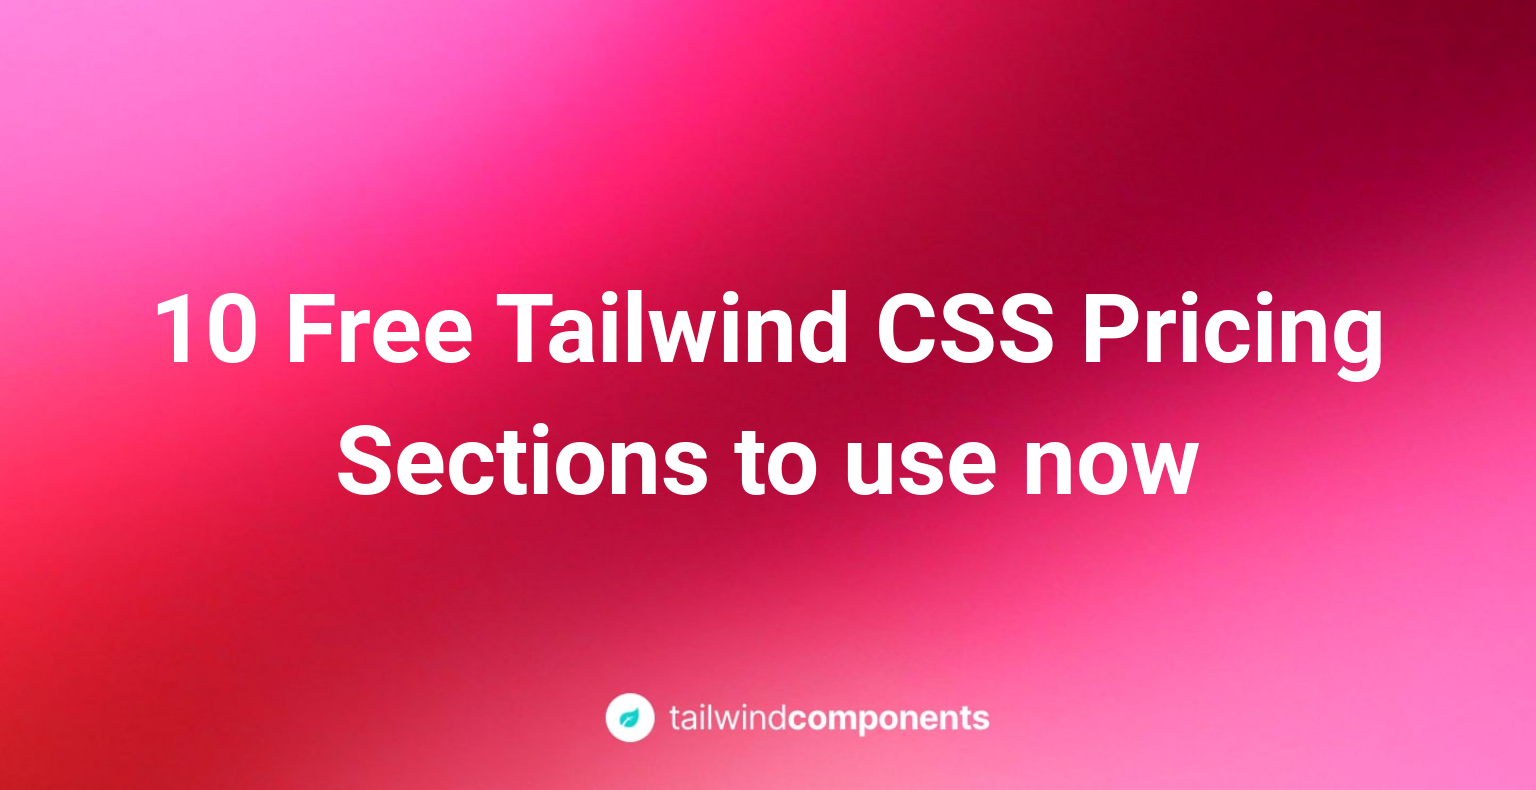 10 Free Tailwind CSS Pricing Sections to use now Image